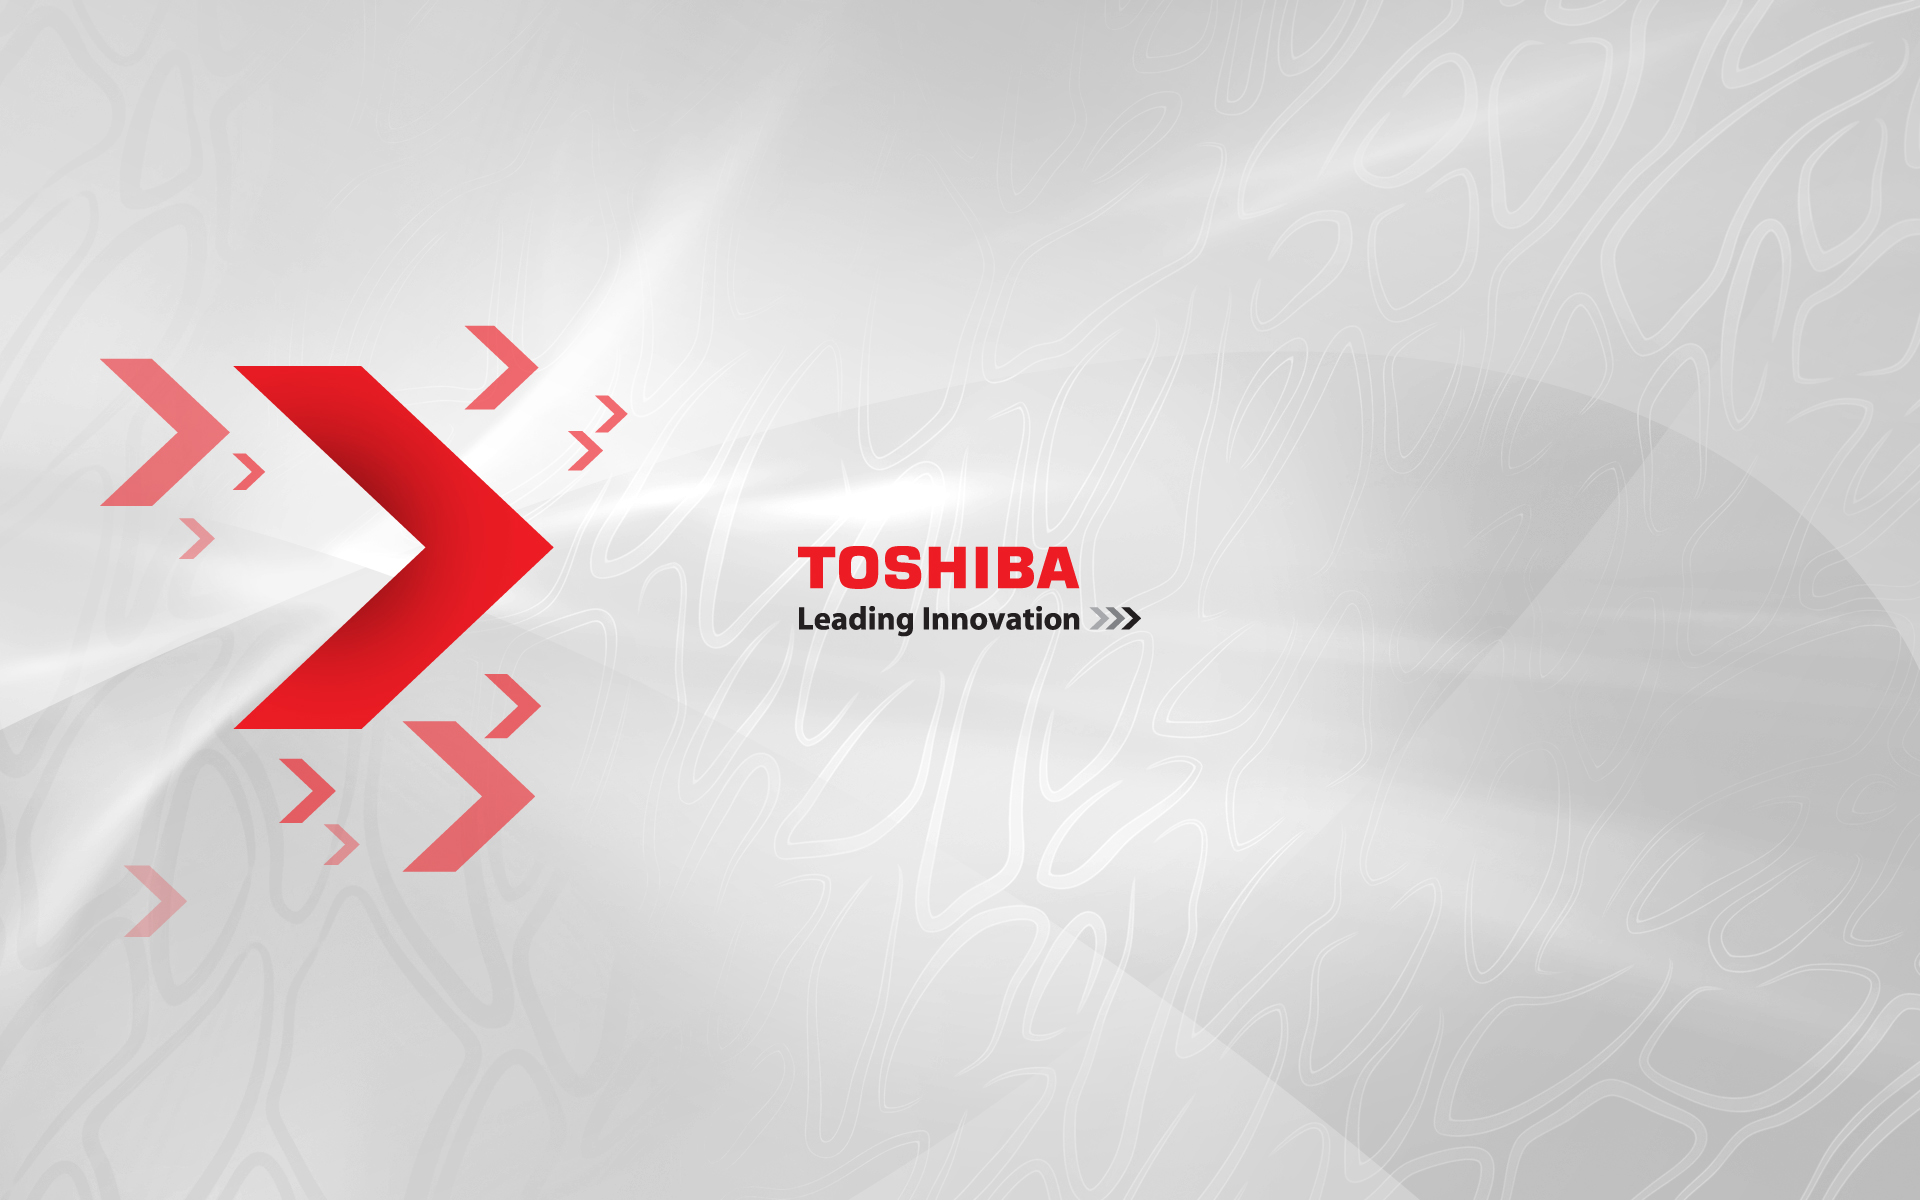 Magnificent Toshiba Wallpaper Full HD Pictures